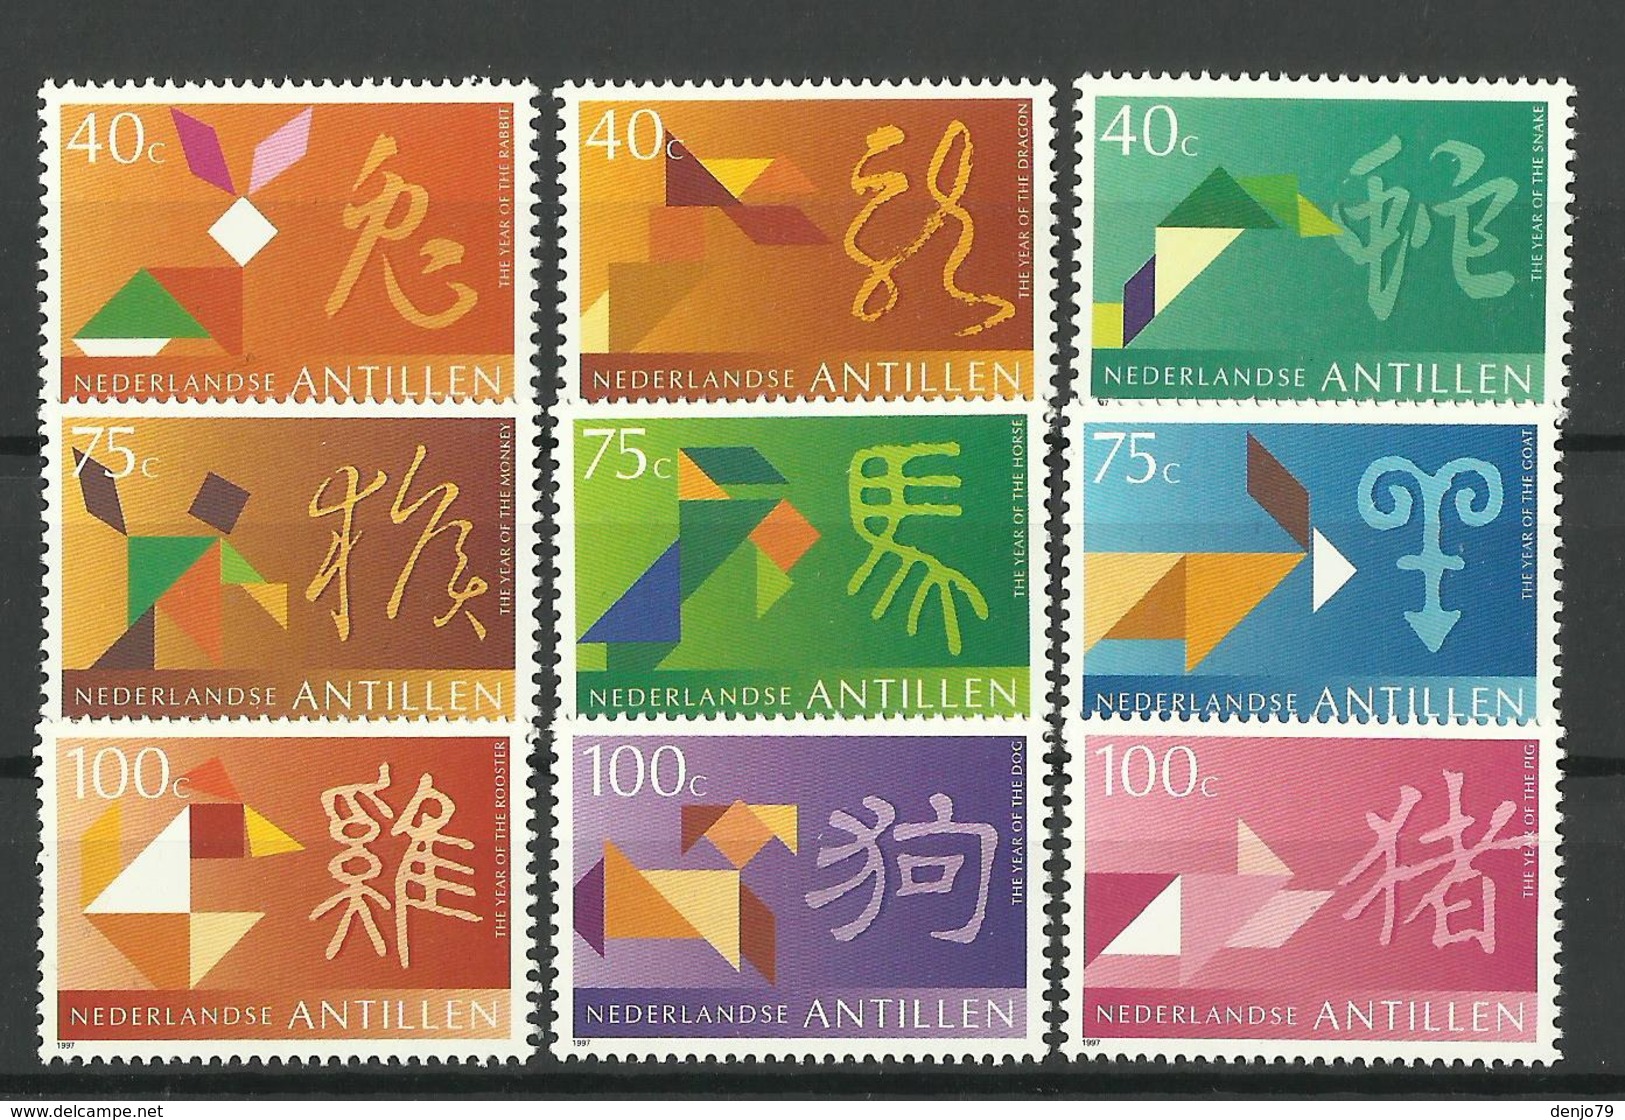 NETHERLANDS ANTILLES ANTILLEN 1997 CHINESE NEW YEARS INCOMPLETE SET MNH - Antilles